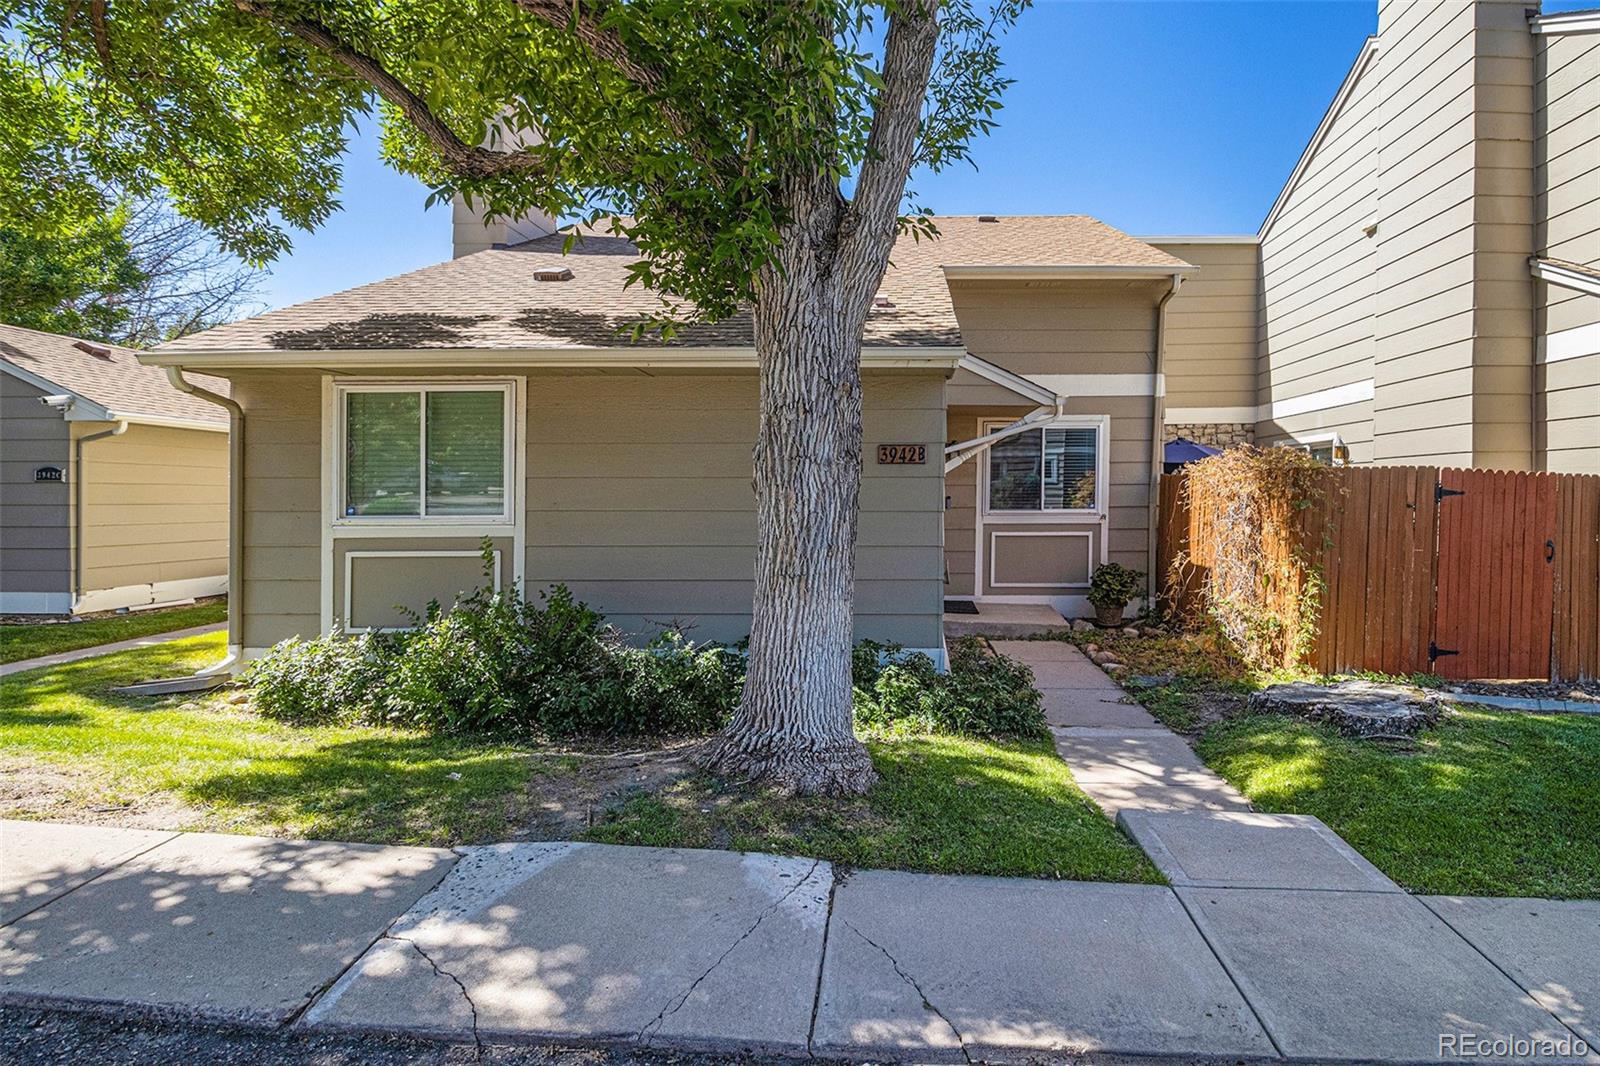 3942 s atchison way, Aurora sold home. Closed on 2023-12-27 for $450,000.